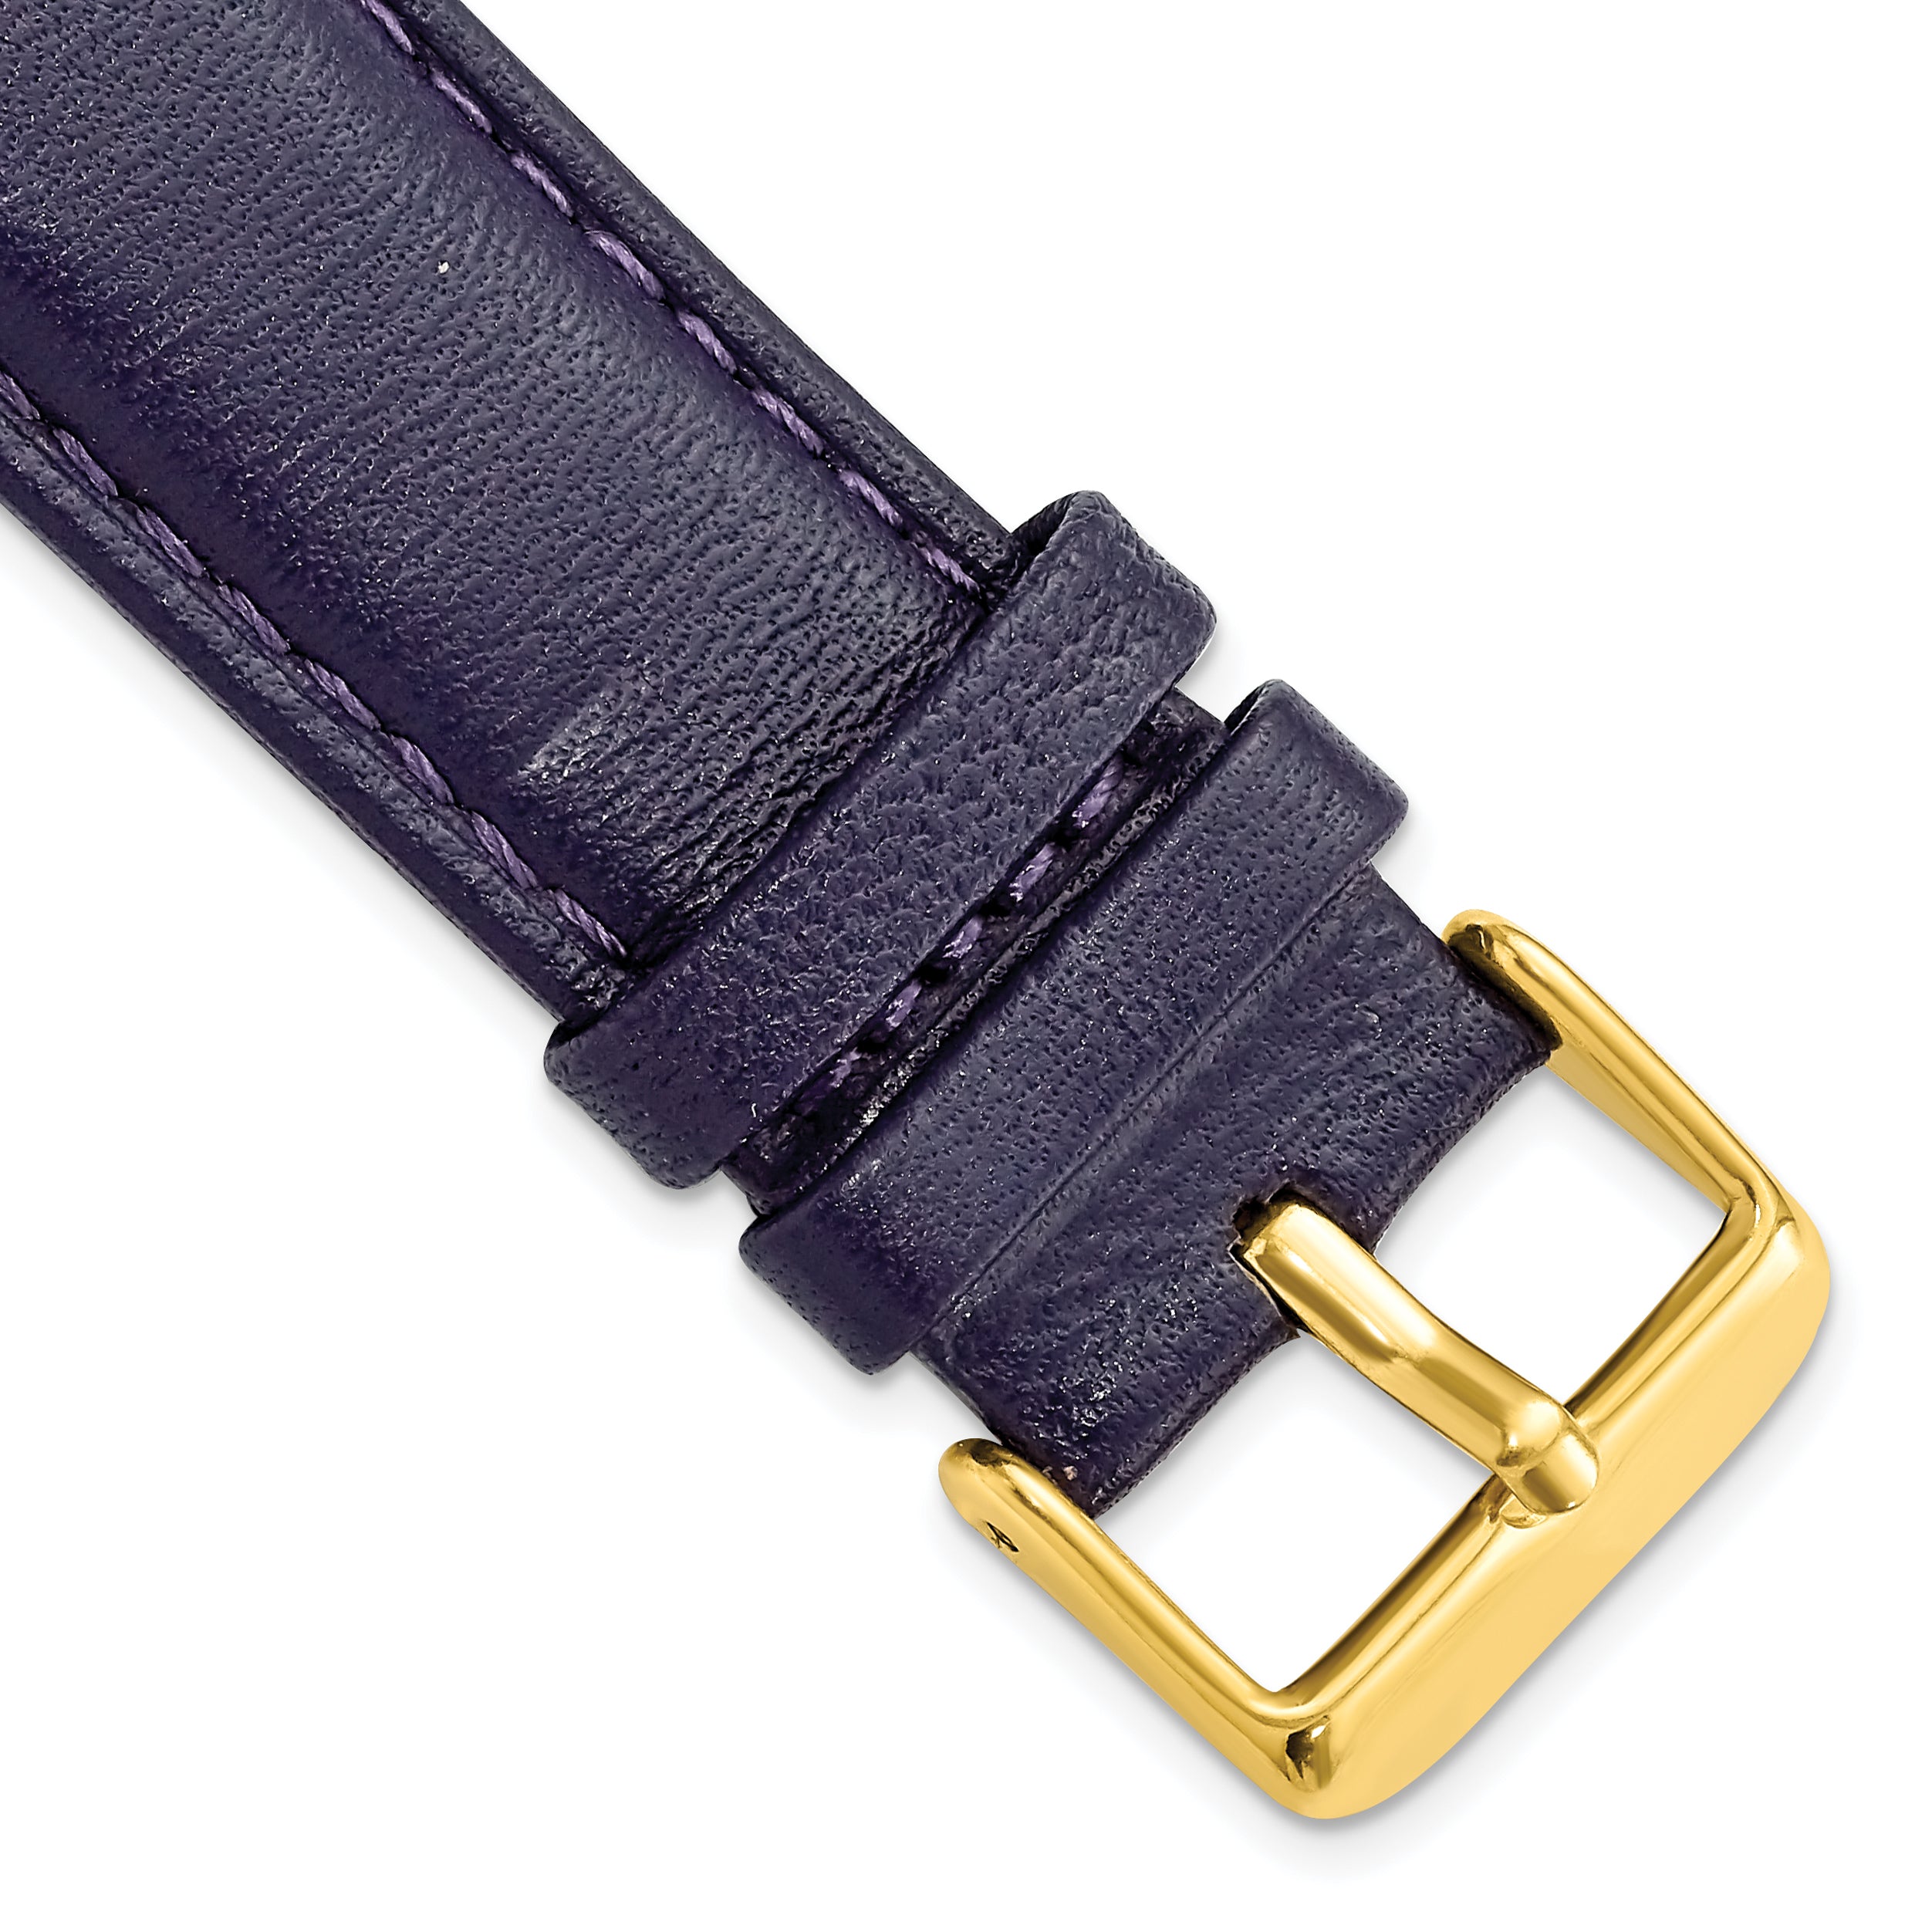 DeBeer 22mm Navy Glove Leather with Gold-tone Panerai Style Buckle 7.75 inch Watch Band